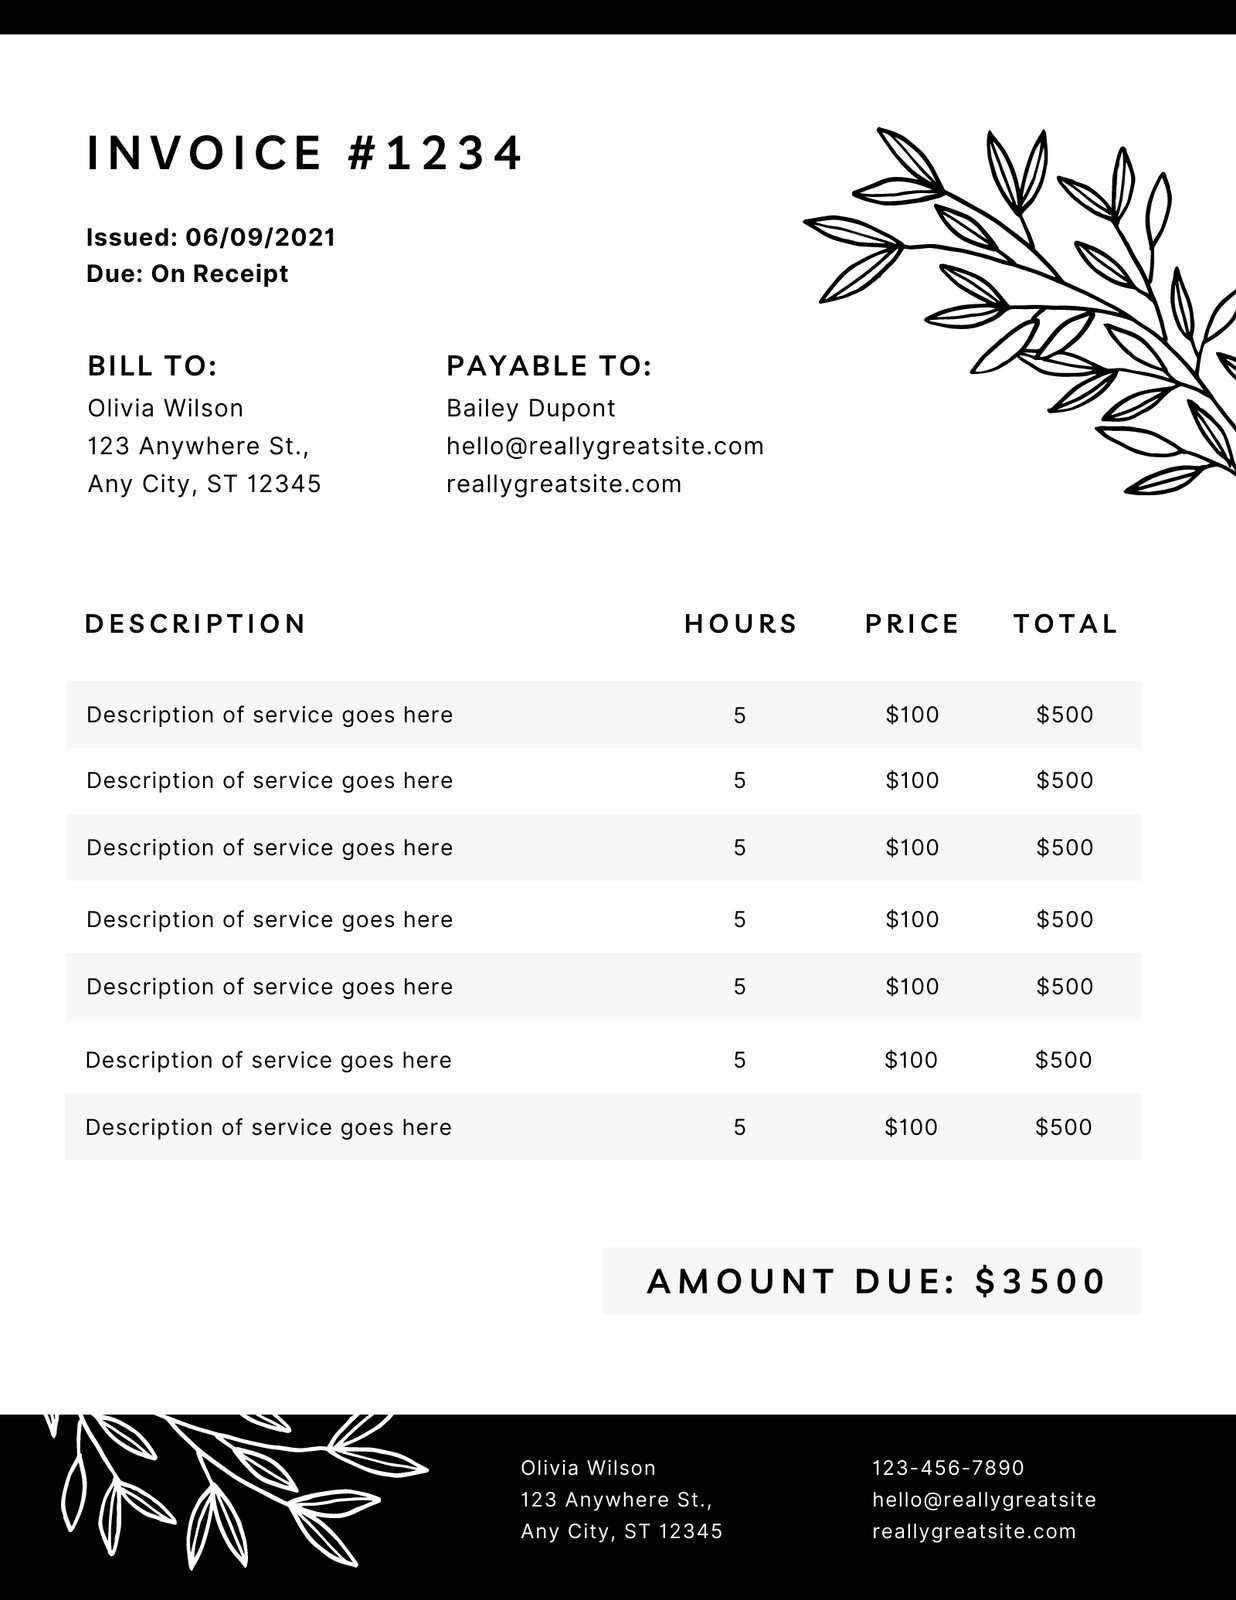 Free, printable, professional invoice templates to customize | Canva